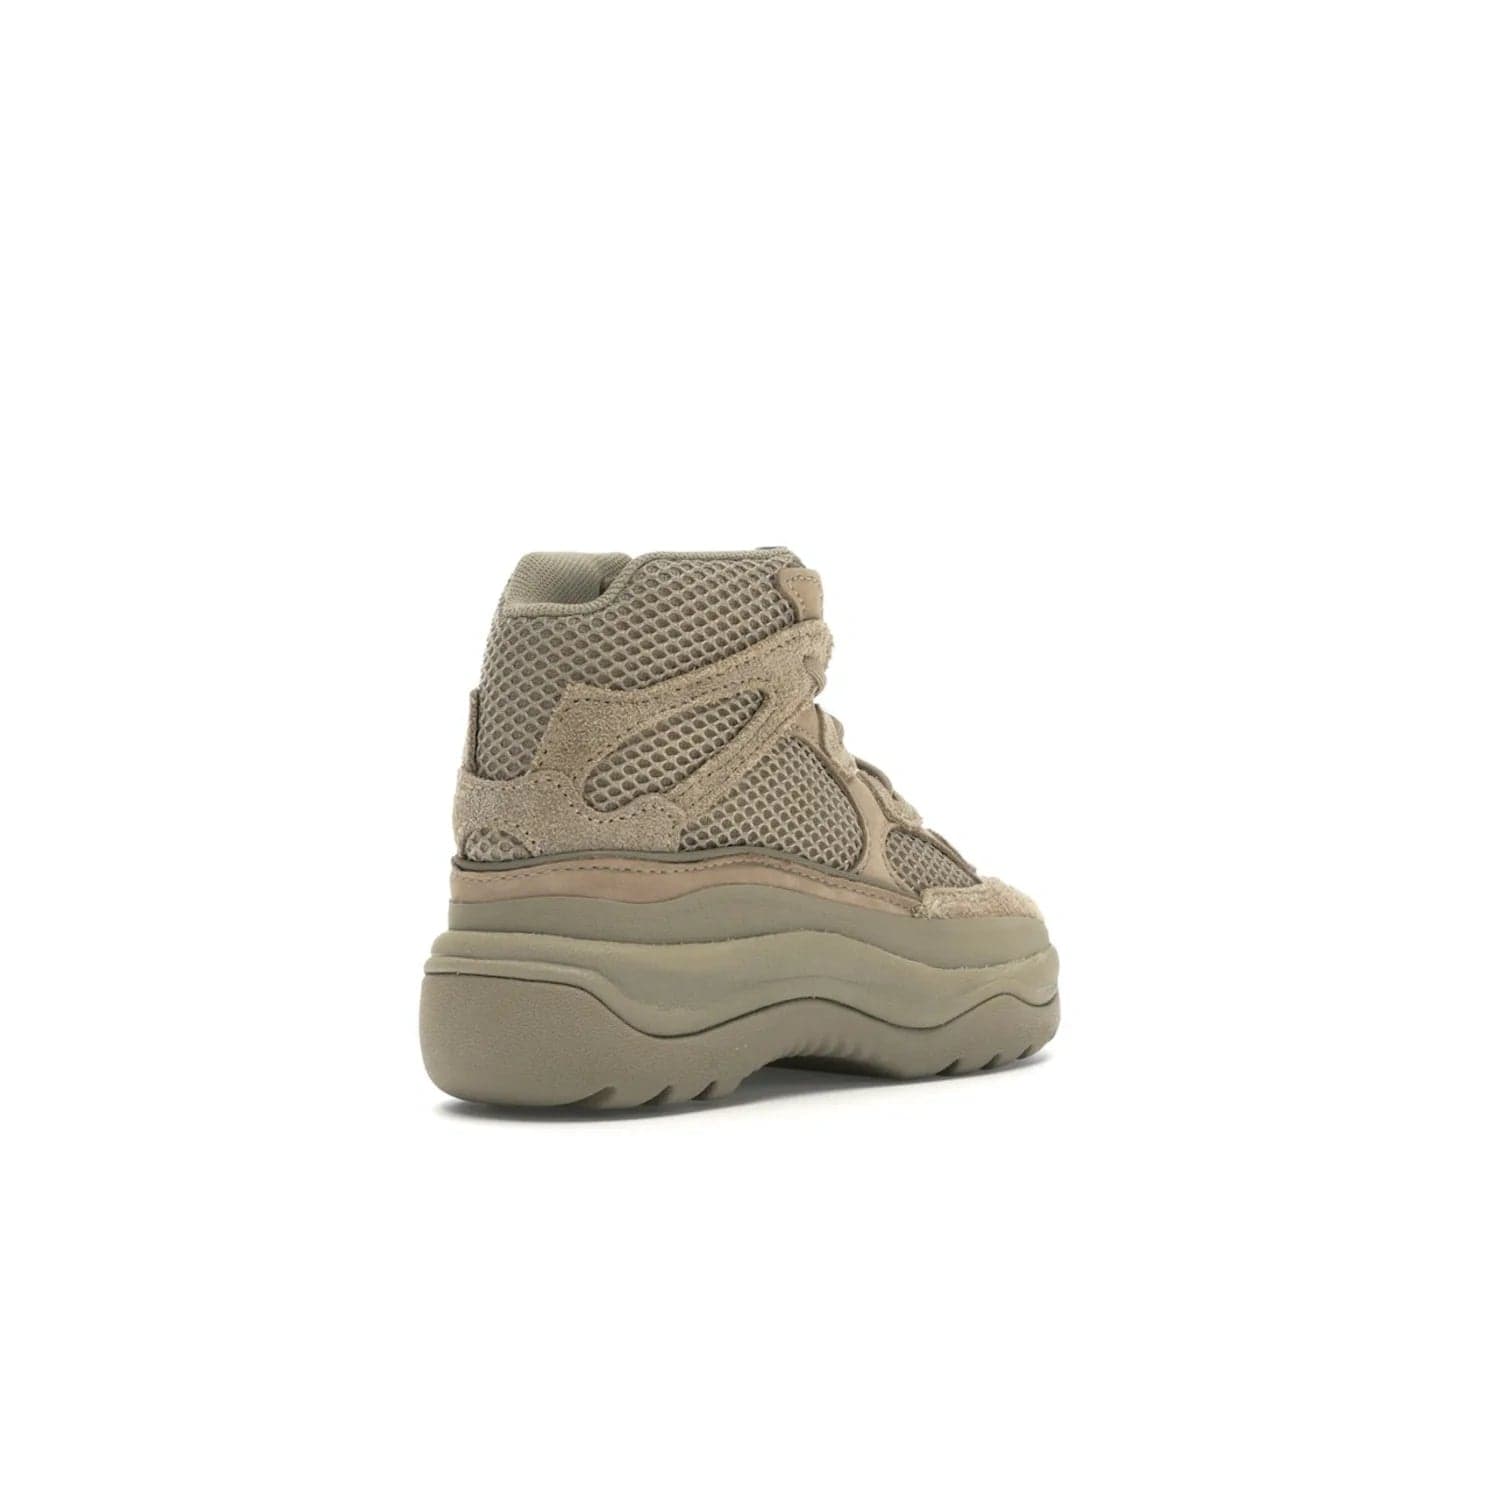 adidas Yeezy Desert Boot Rock (Kids) - Image 32 - Only at www.BallersClubKickz.com - Elevate your style this season with the adidas Yeezy Desert Boot Rock. Crafted from layered nylon and suede, this chic kids' silhouette features an EVA midsole and rubber outsole for superior cushioning and traction.